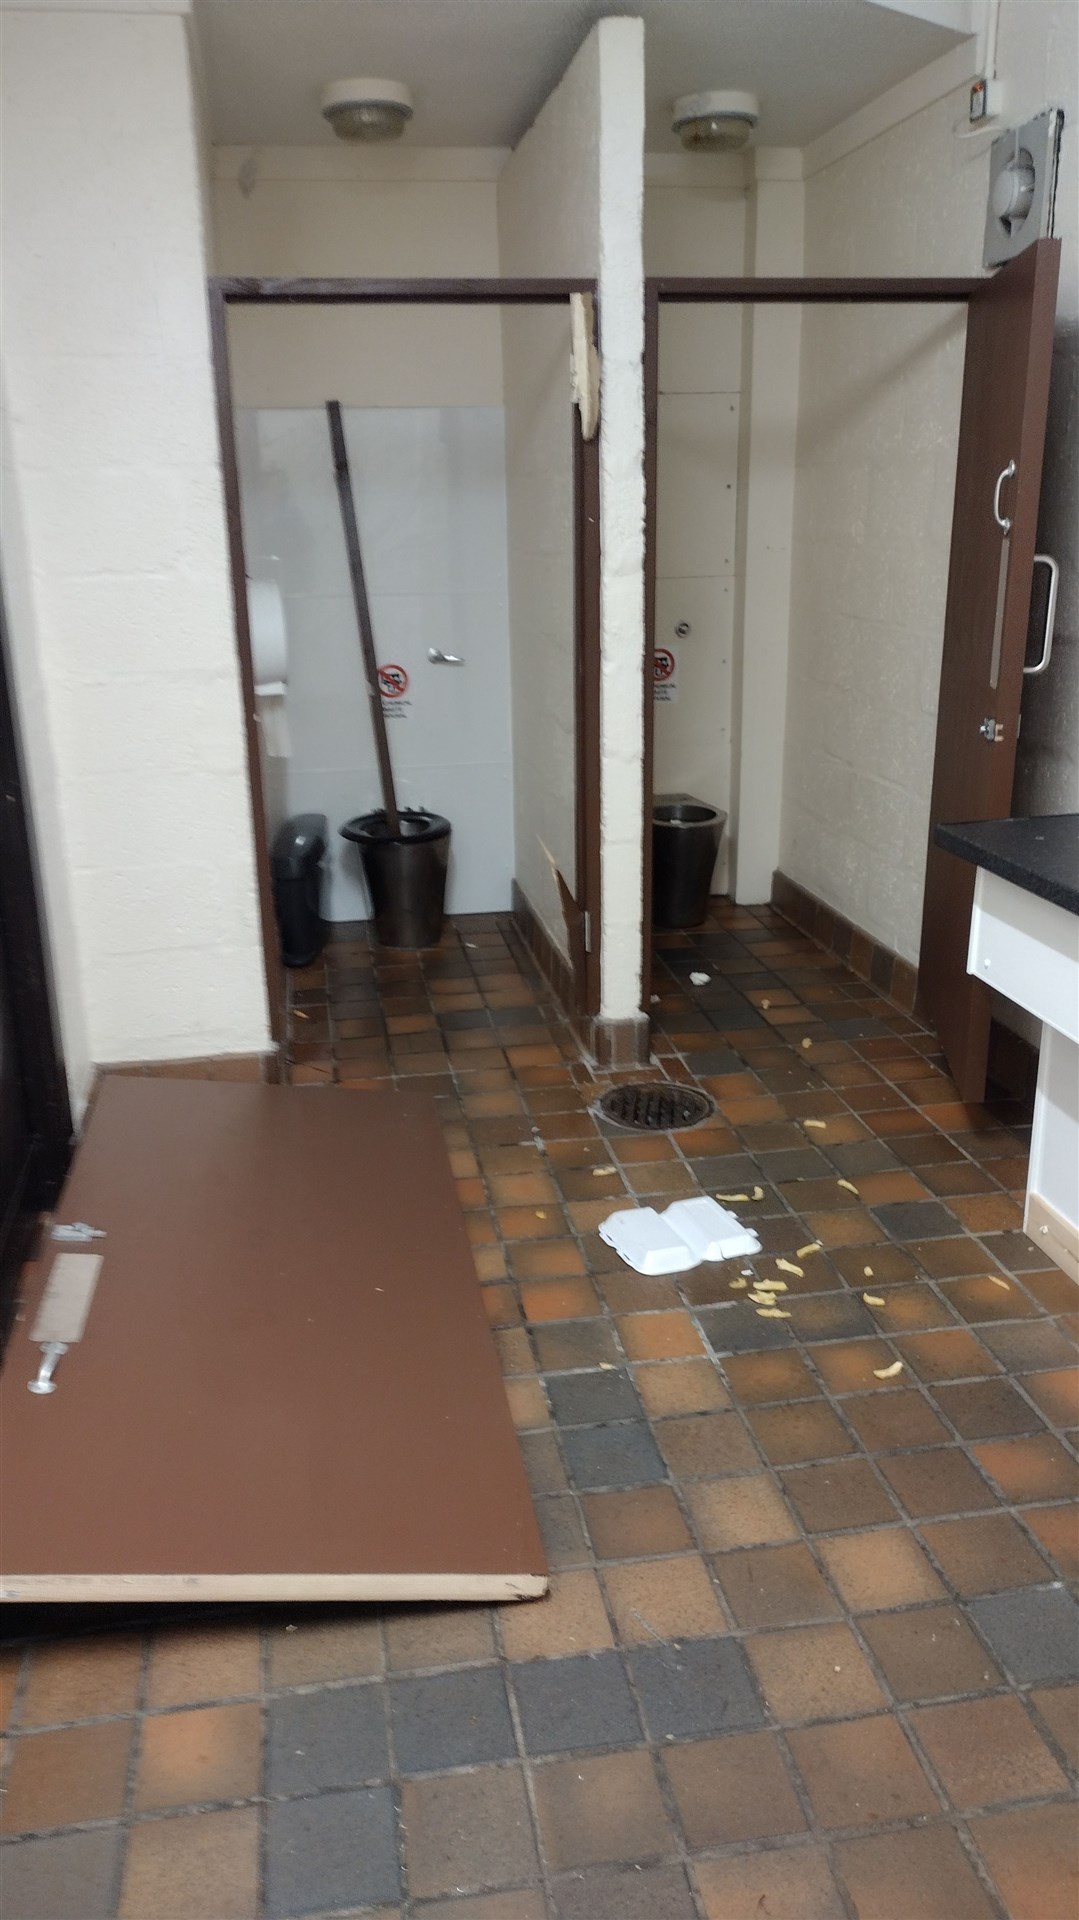 The toilets have been the subject of persistent vandalism and will now be closed.